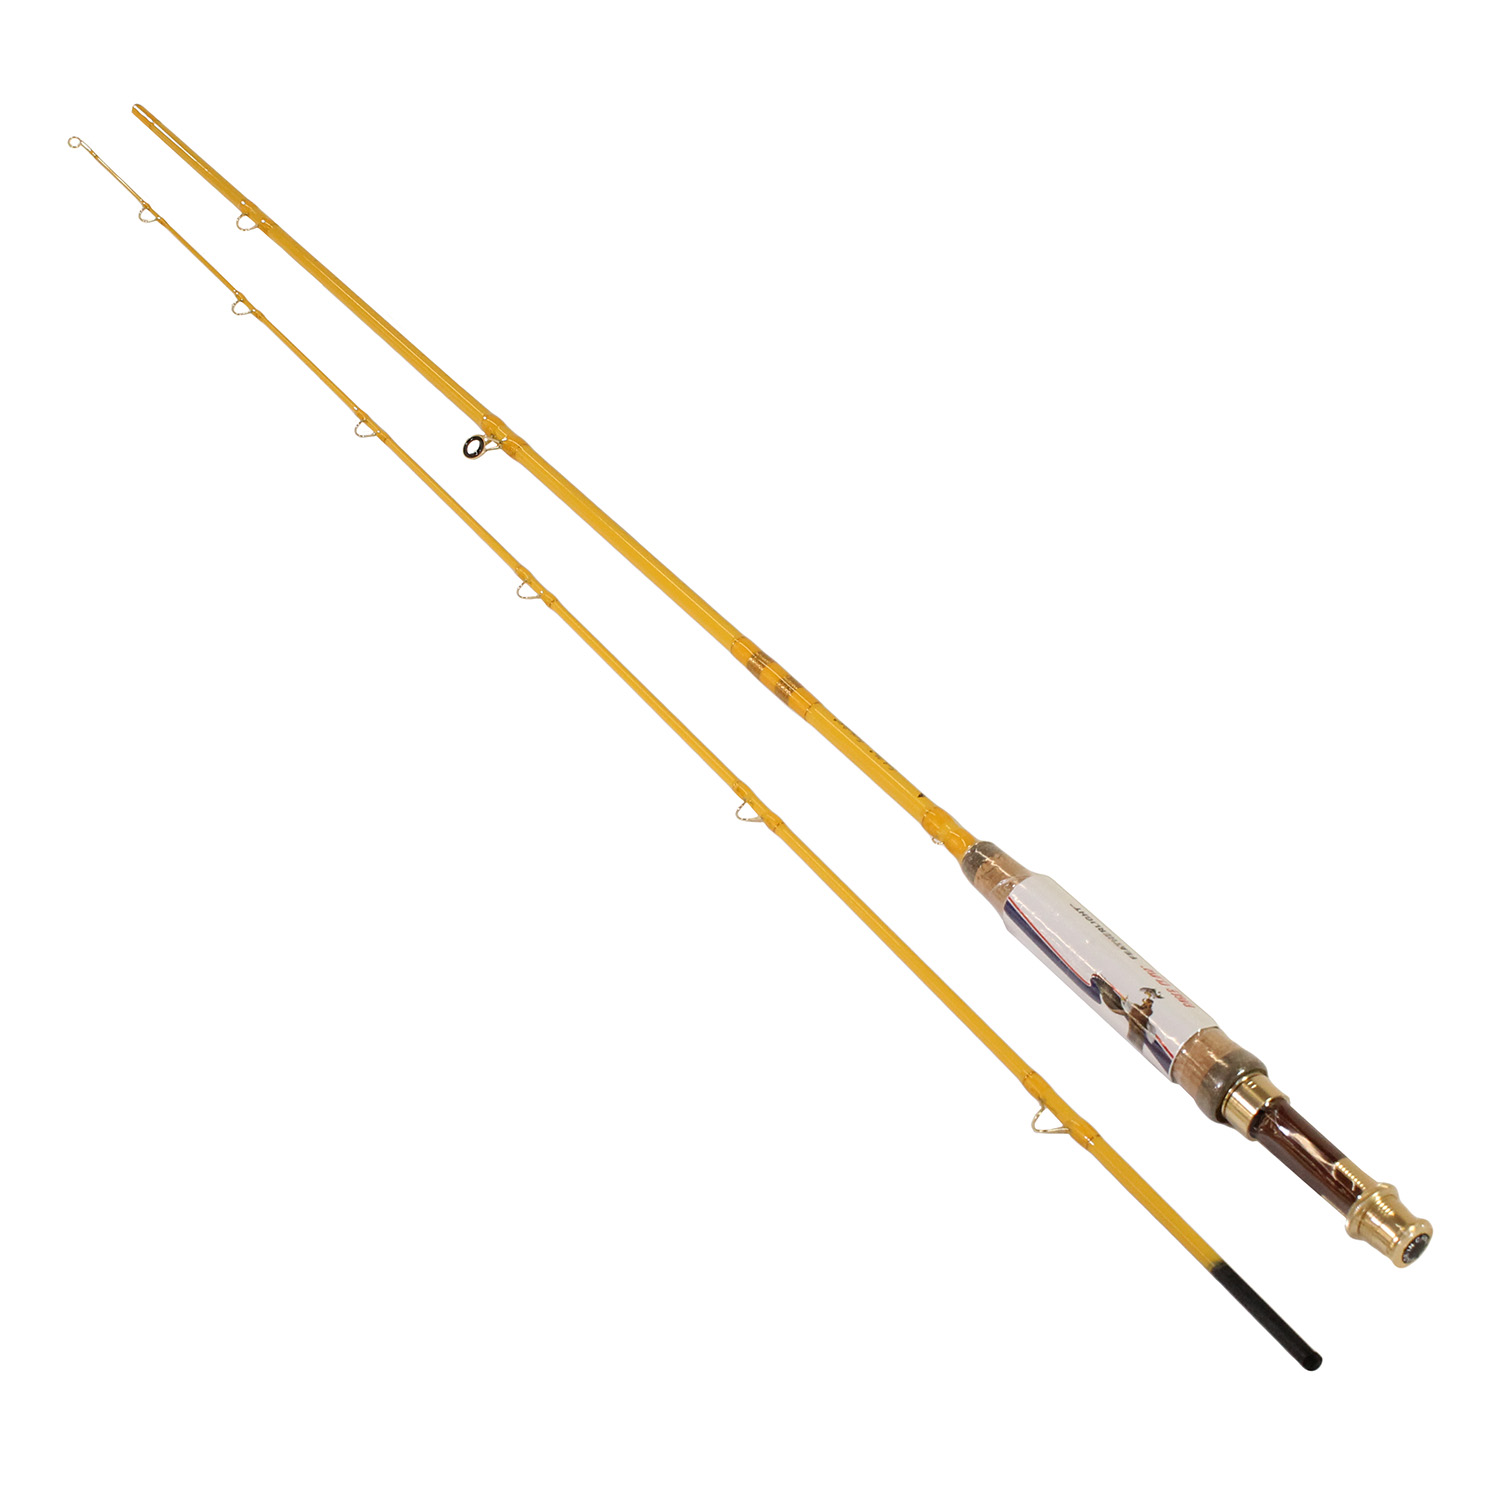 Eagle Claw Featherlight Fly Rod - image 1 of 7